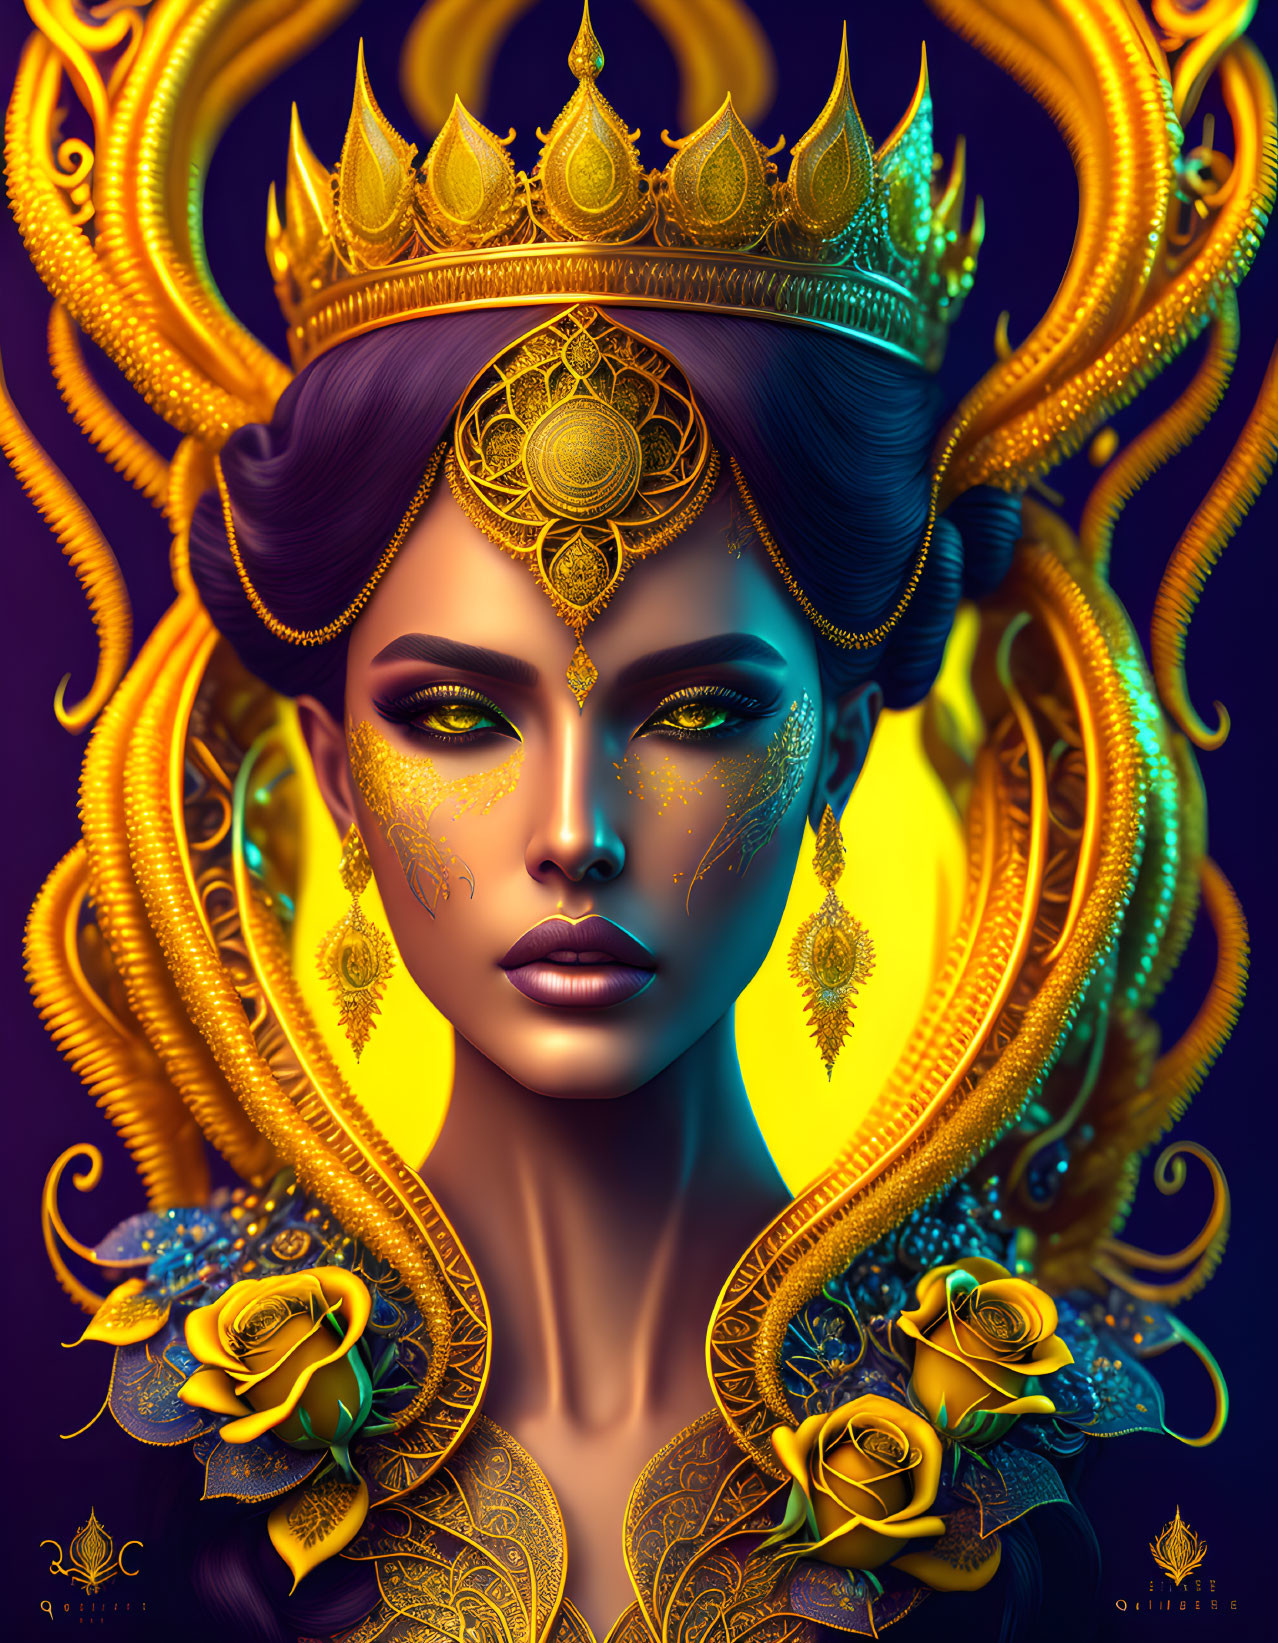 Digital art portrait of woman with purple hair, golden crown, jewelry, intricate designs, roses, on